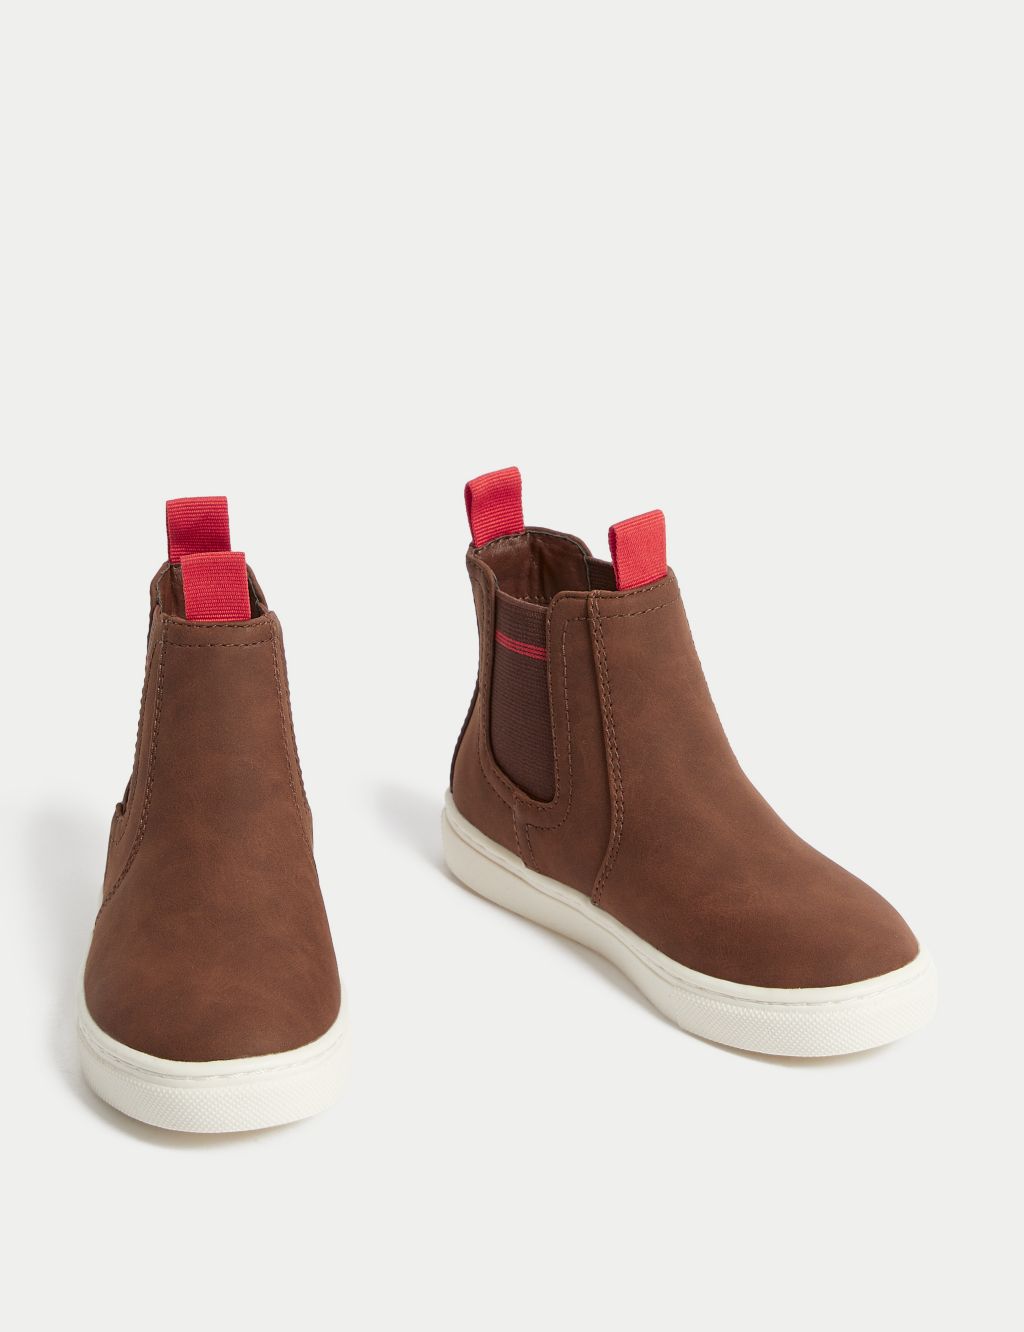 Kids' Freshfeet™ Chelsea Boots (4 Small - 13 Small) image 2